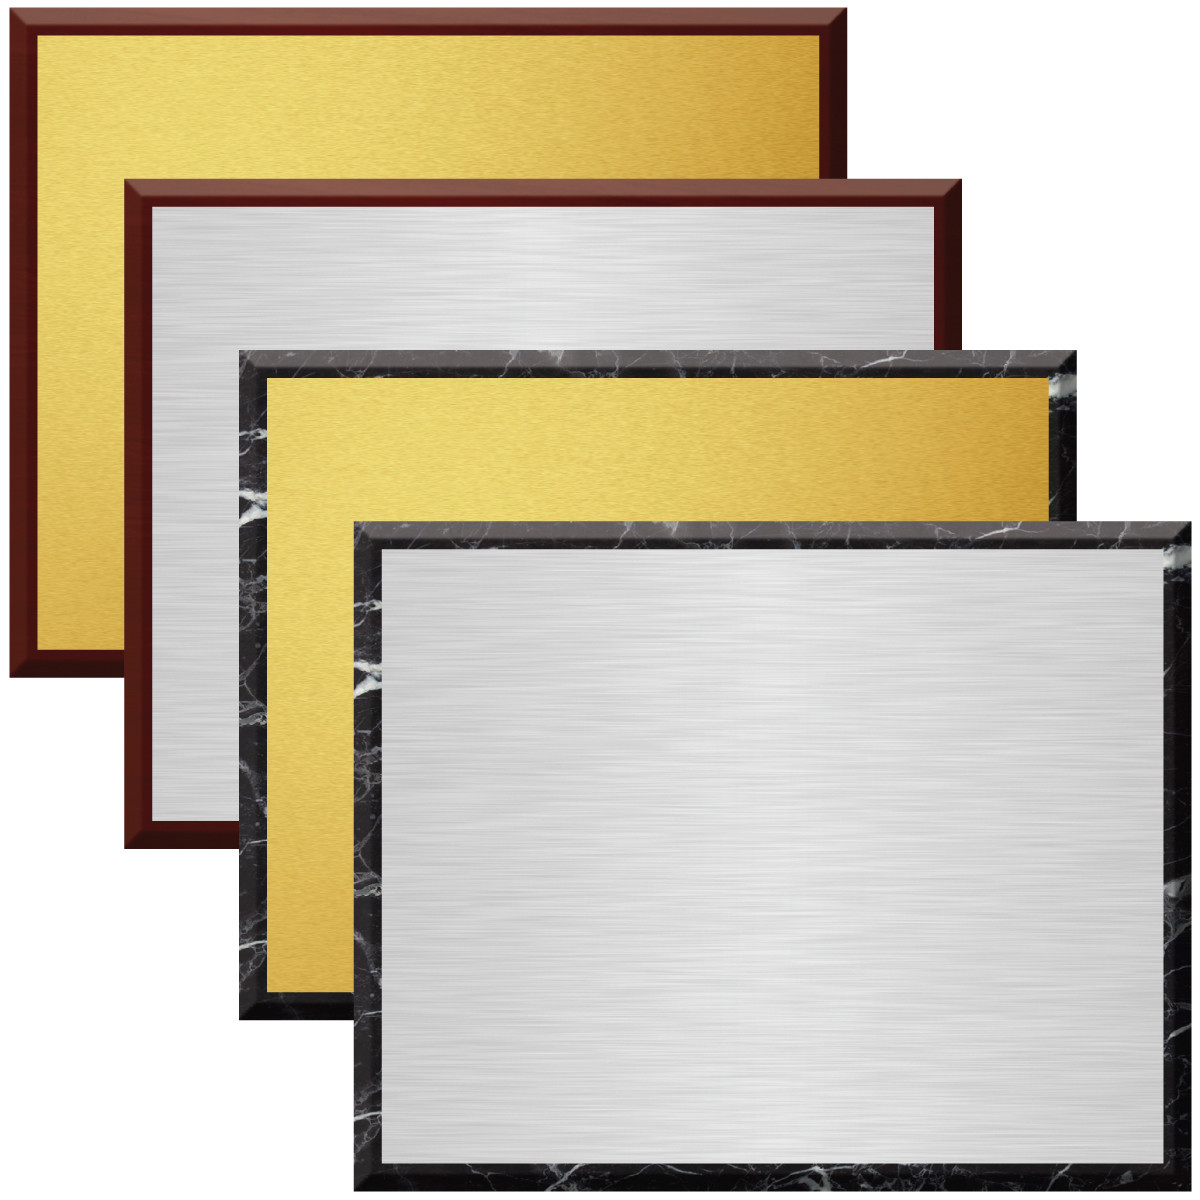 Sublimated Plaques - Color Metal Award 12" x 15"